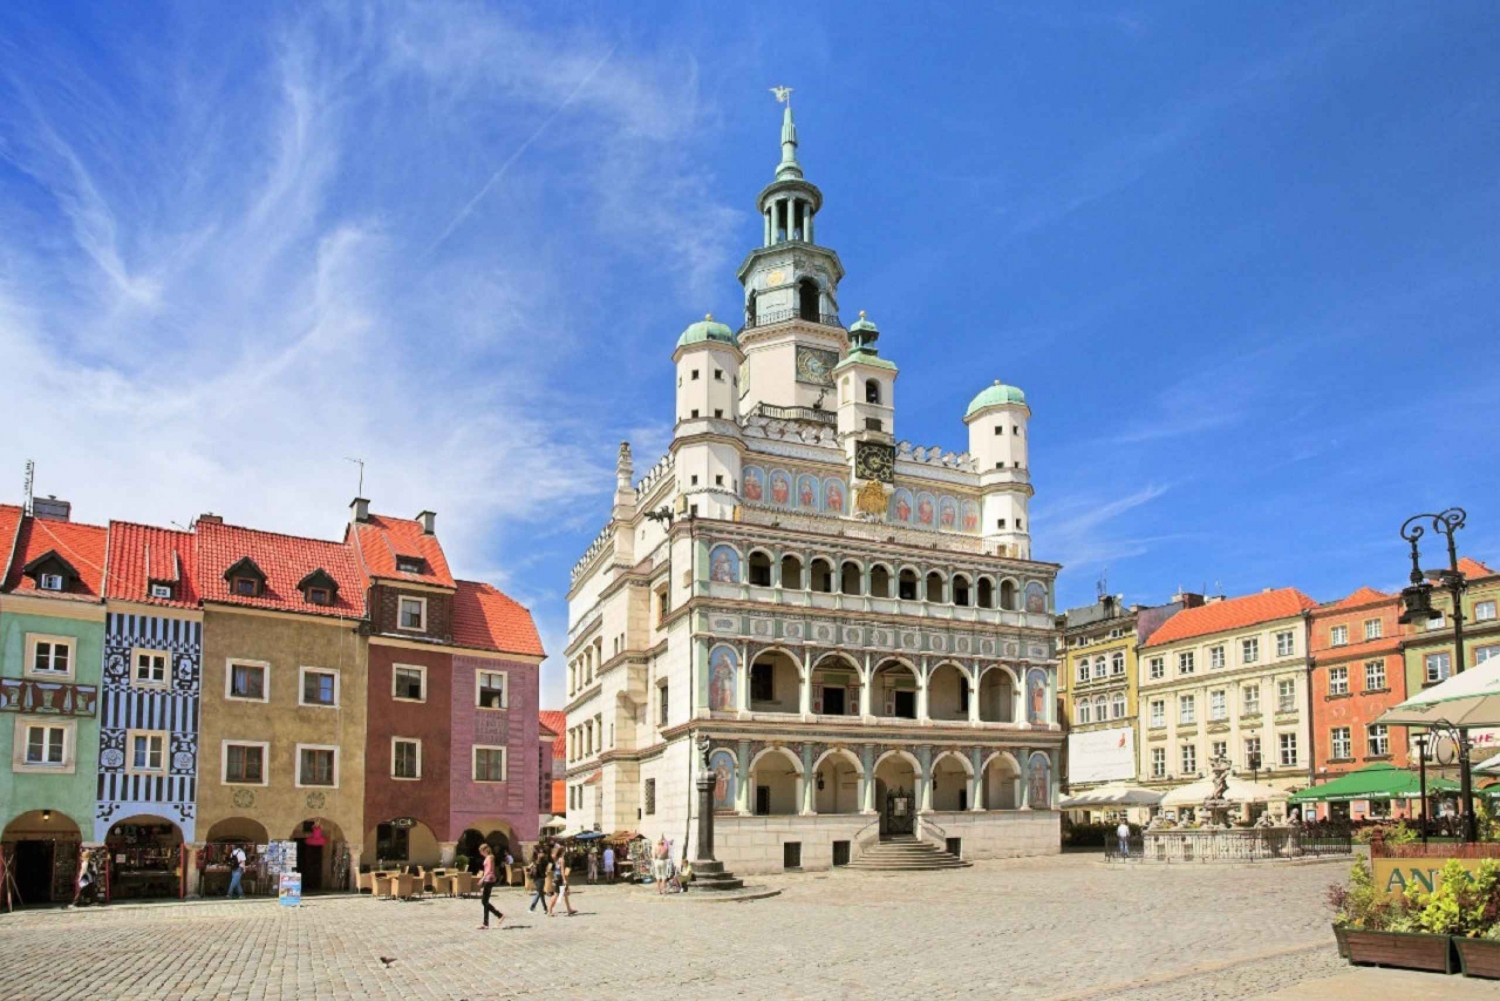 From Warsaw: Poznan Small Group Day Trip with Lunch